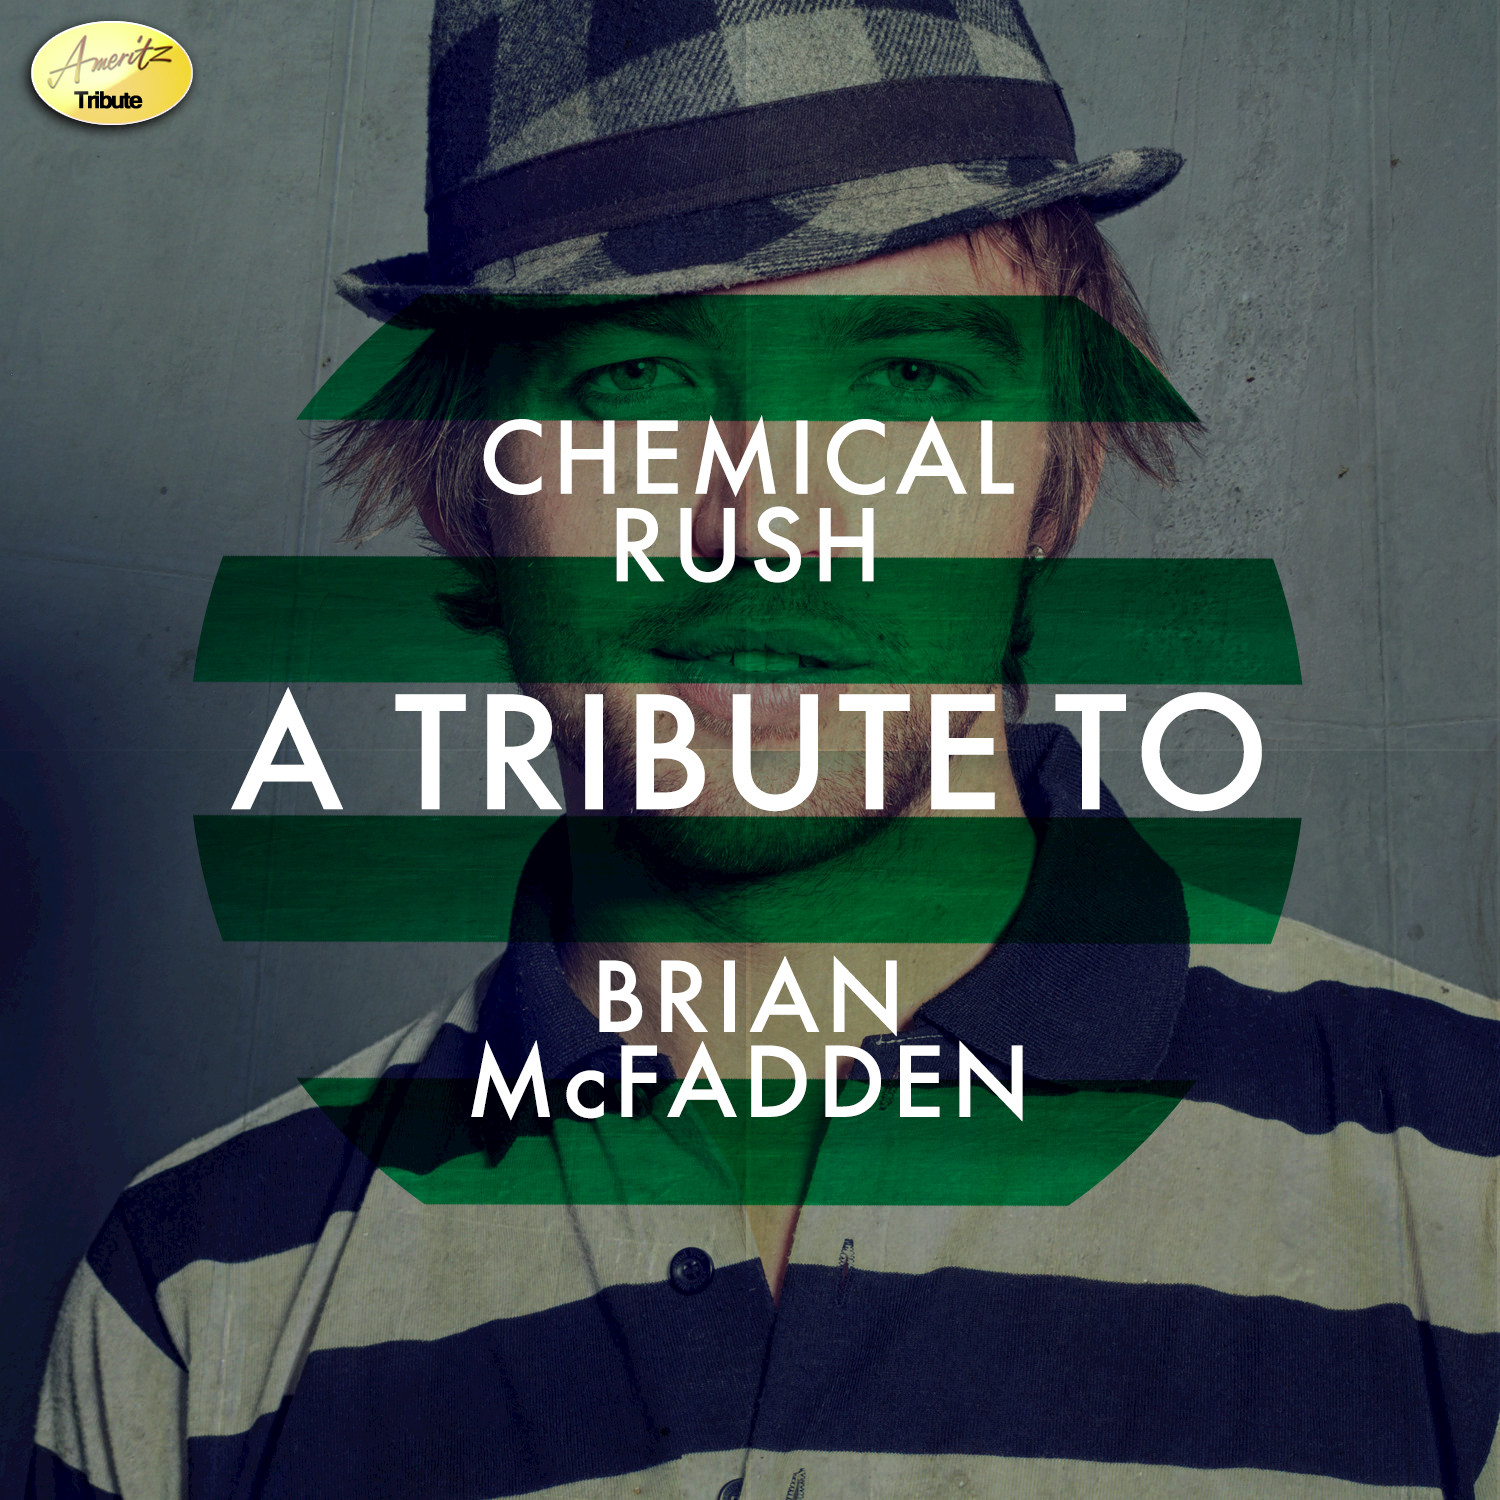 Chemical Rush - A Tribute to Brian McFadden